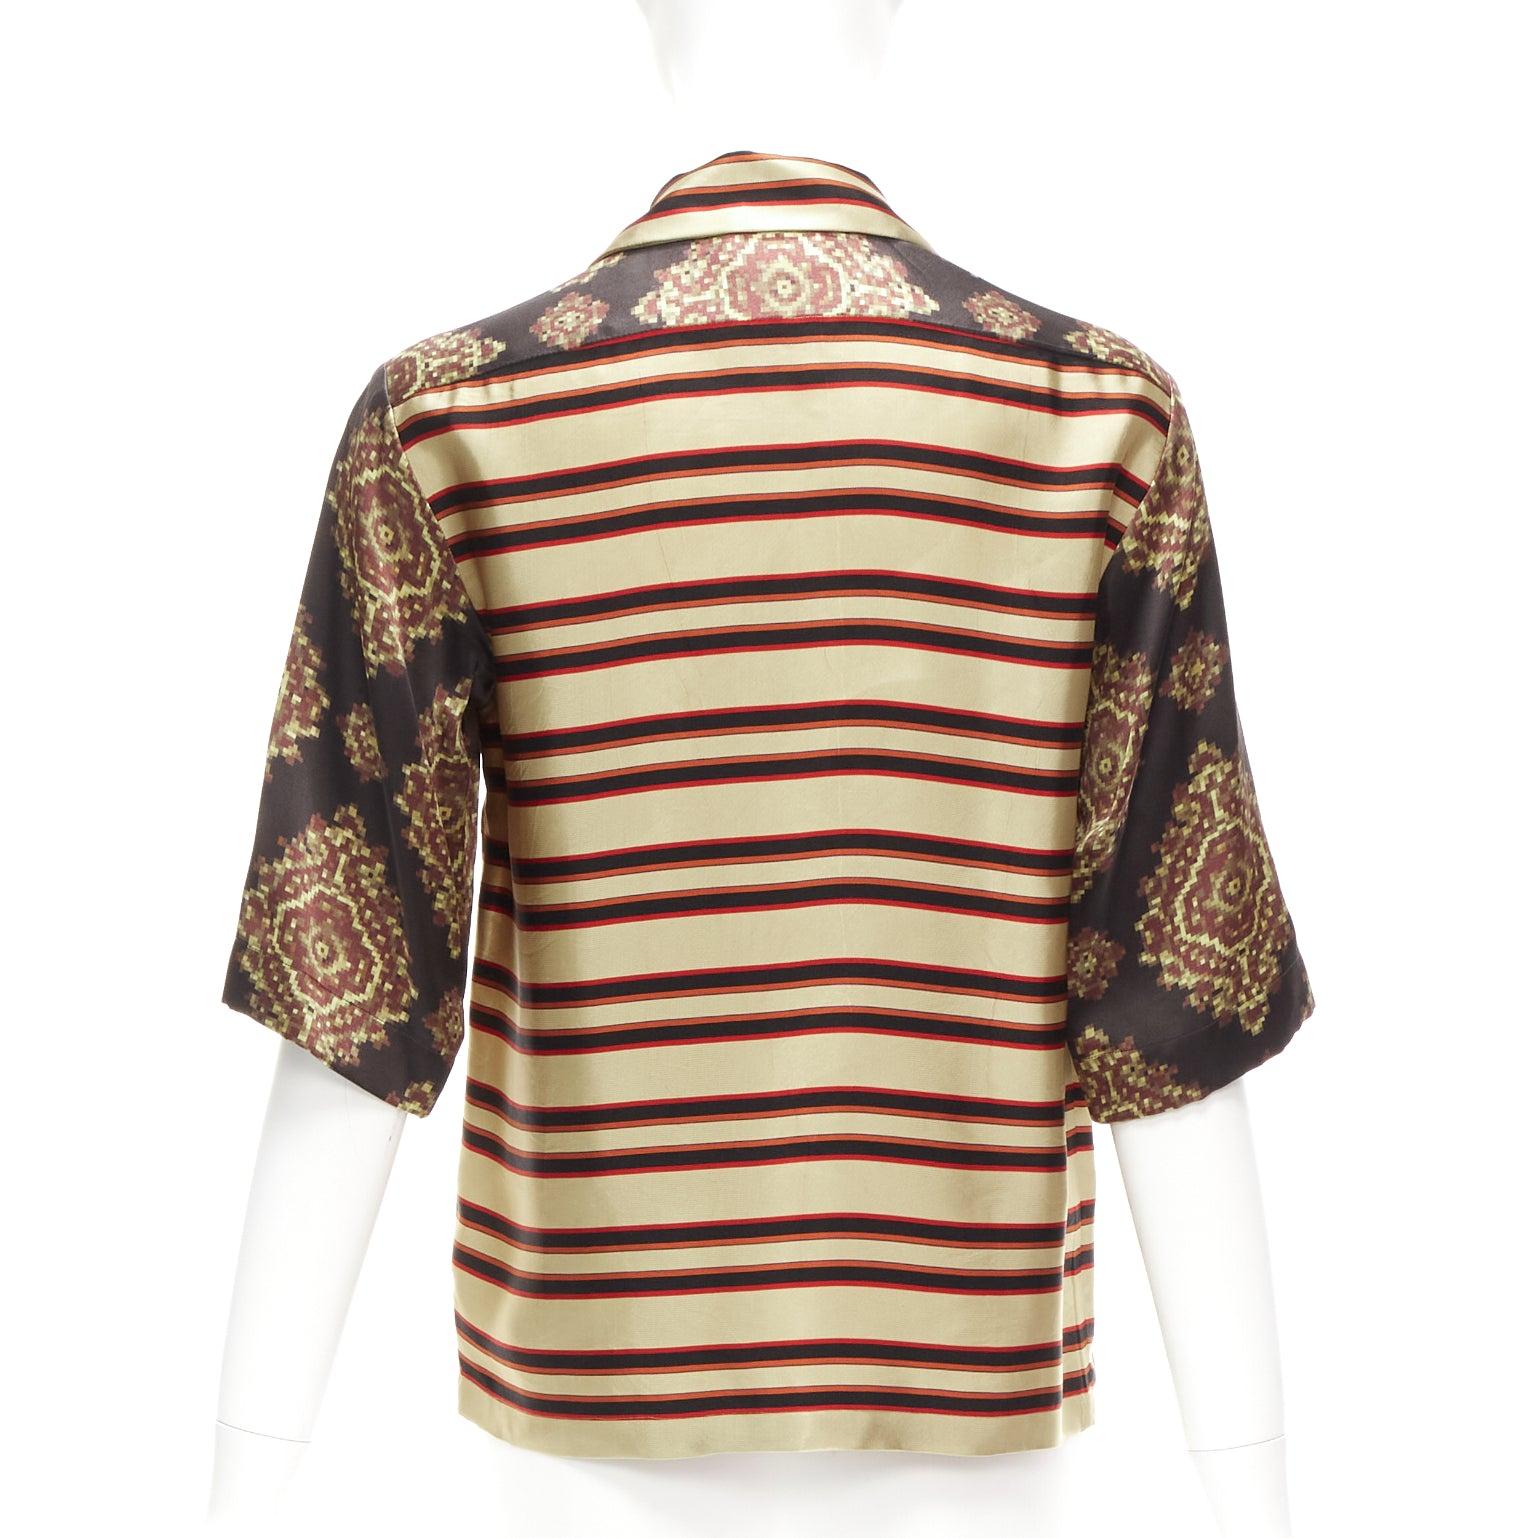 DRIES VAN NOTEN black pixel paisley print striped relaxed shirt FR36 S
Reference: CELG/A00335
Brand: Dries Van Noten
Material: Acetate, Blend
Color: Multicolour
Pattern: Striped
Closure: Button
Made in: Hungary

CONDITION:
Condition: Excellent, this